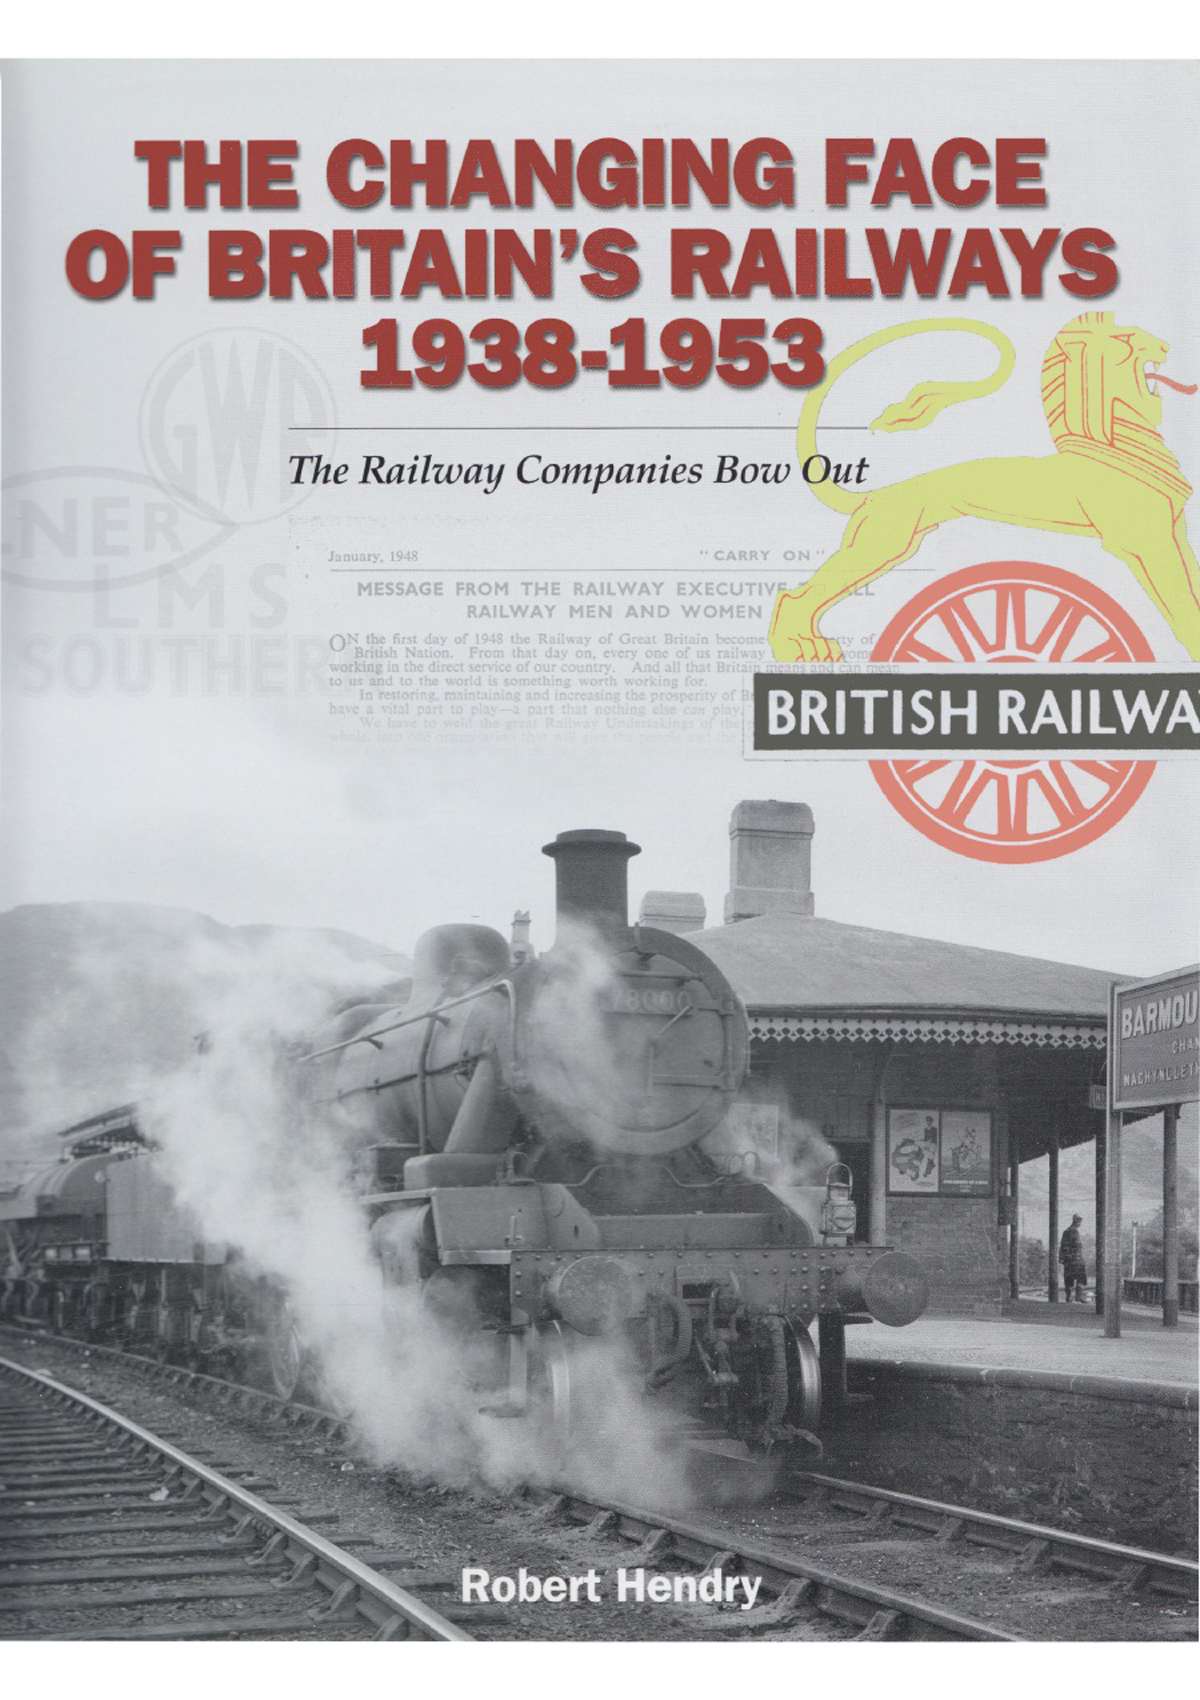 The Changing Face of Britain's Railways 1938-1953